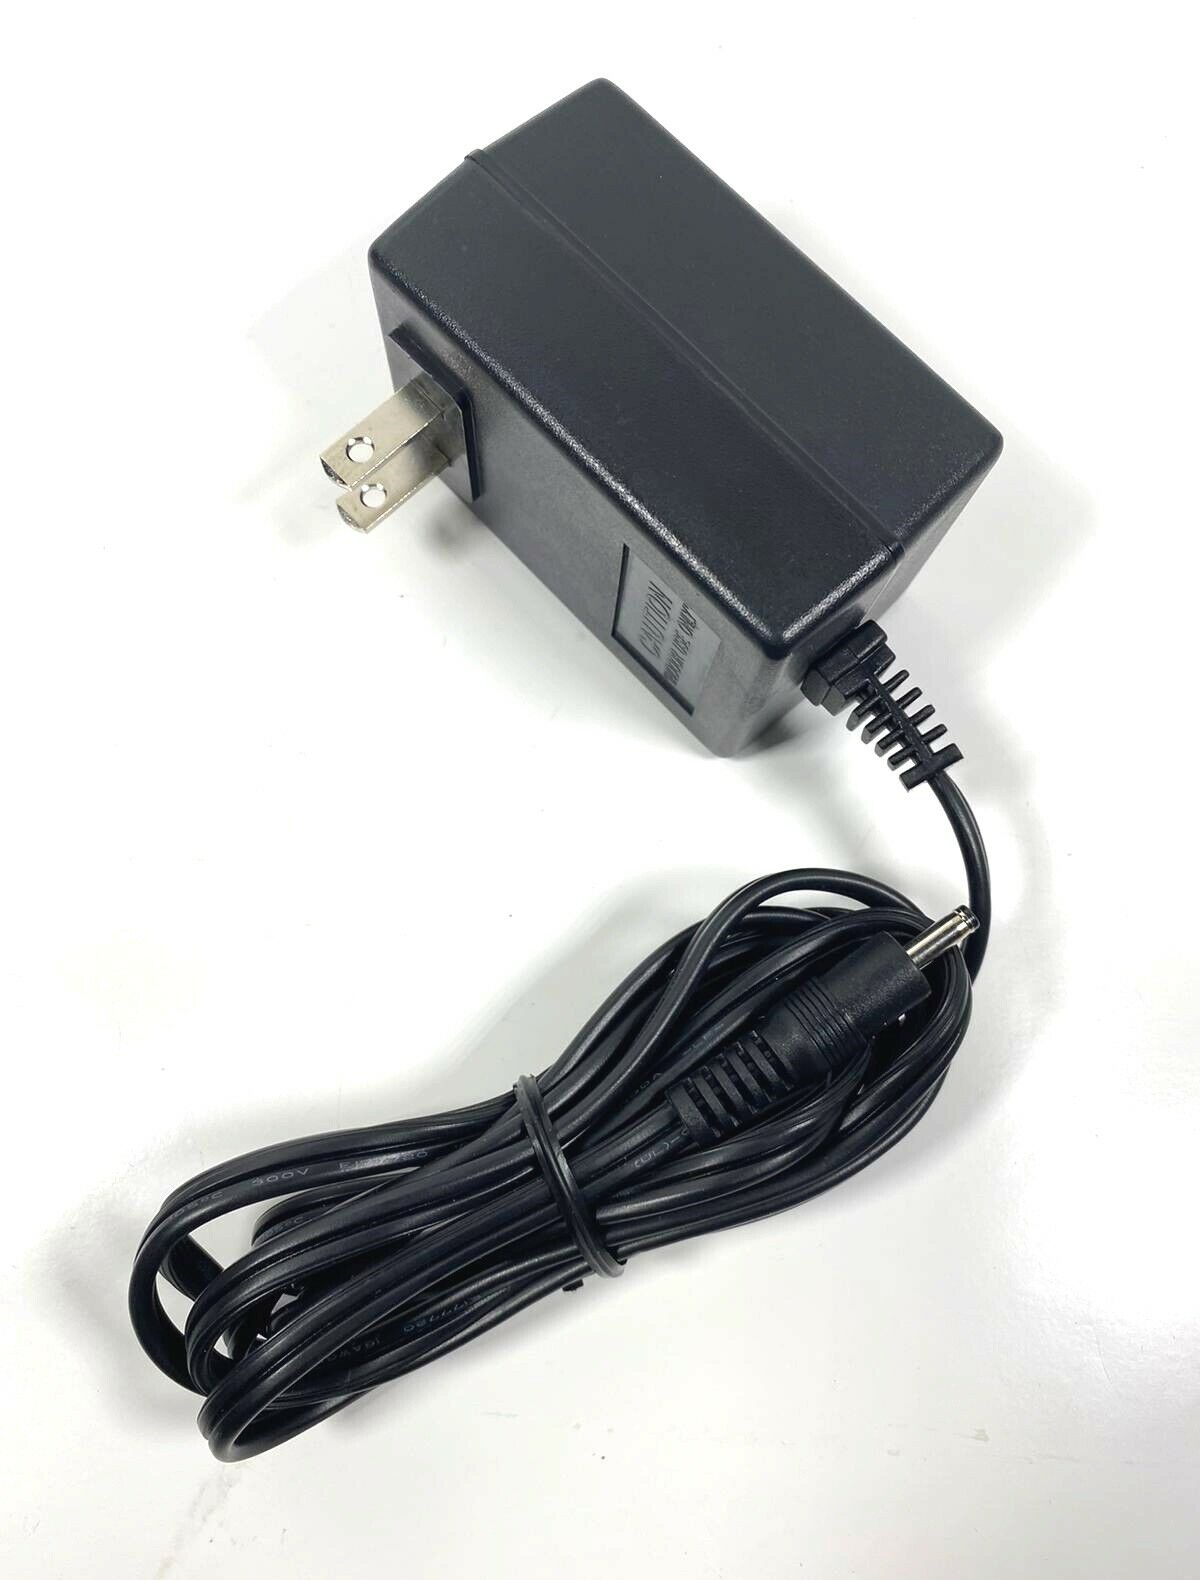 Vanguard MP15-WA-120A-A Power Adapter 12VDC 1.5A Item brand new but comes without original packaging! Actual item pict